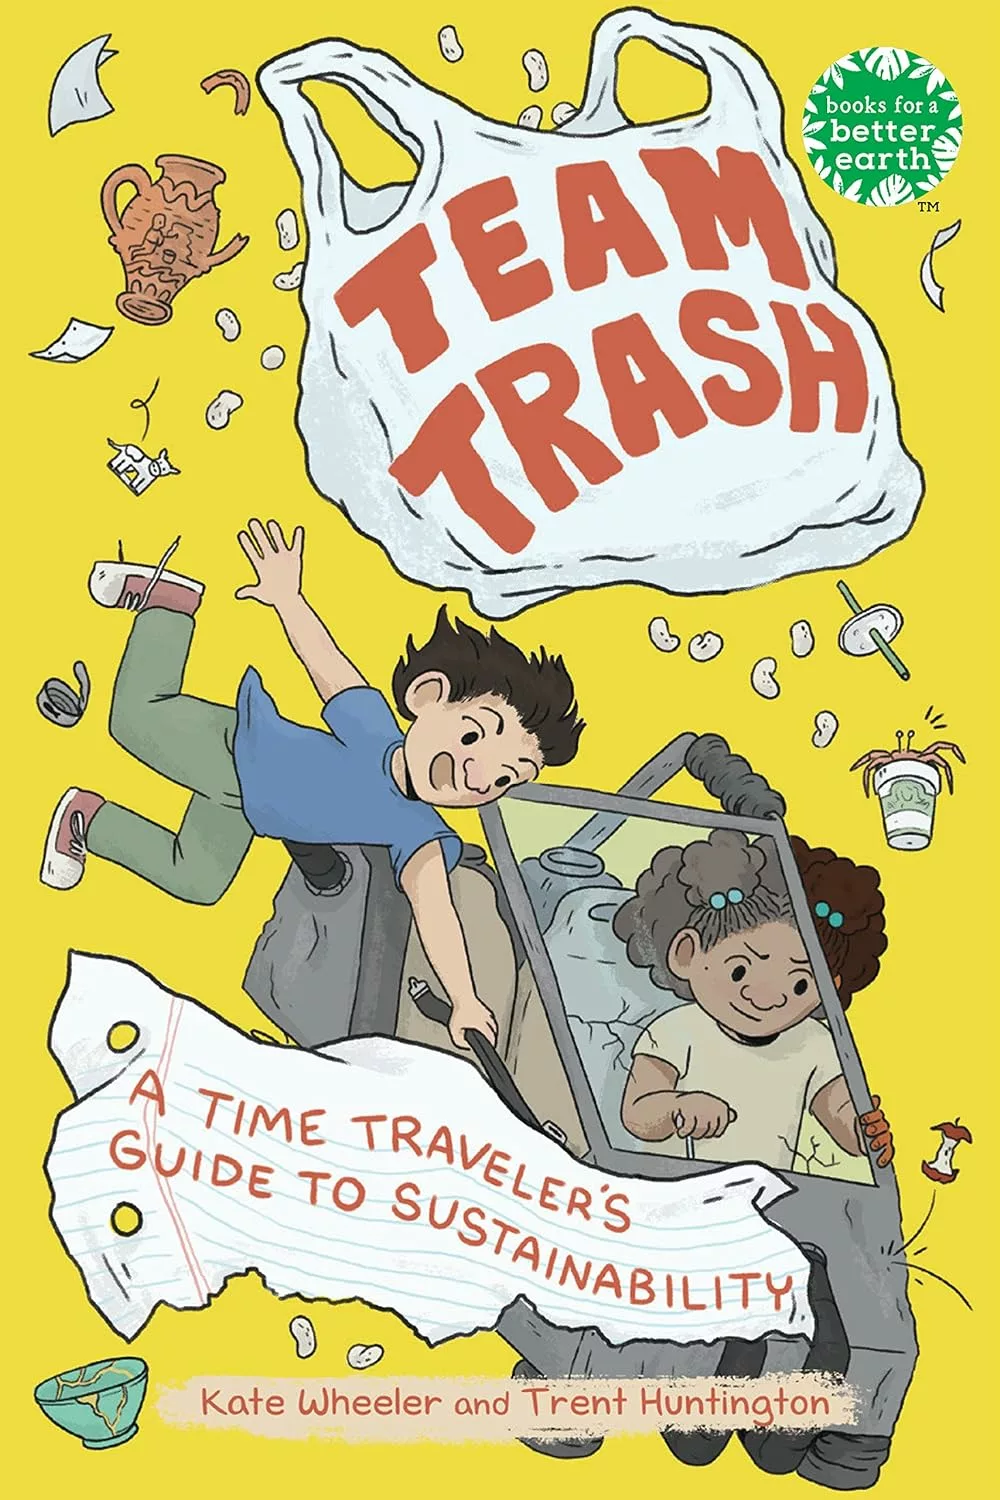 Team Trash: A Time Traveler's Guide to Sustainability by Kate Wheeler and Trent Huntington, by Kate Wheeler 